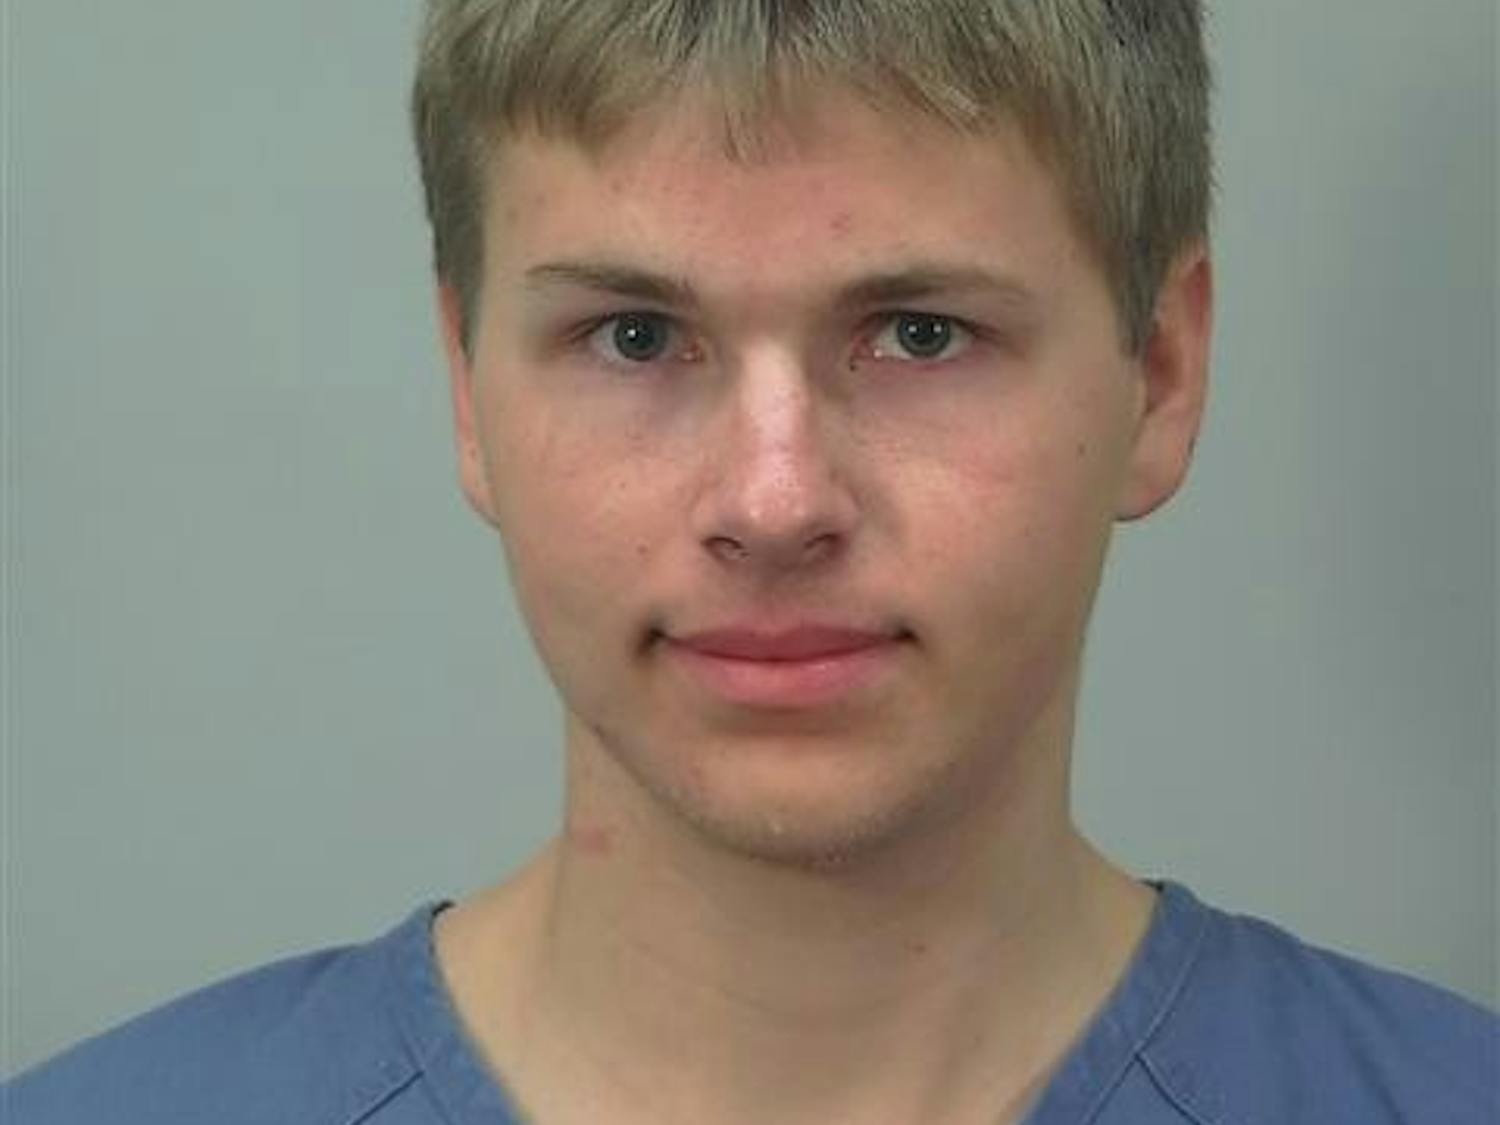 UW-Madison student Alec Shiva was booked in the Dane County Jail Thursday for second-degree sexual assault and other charges that reportedly occurred in a UW-Madison residence hall.